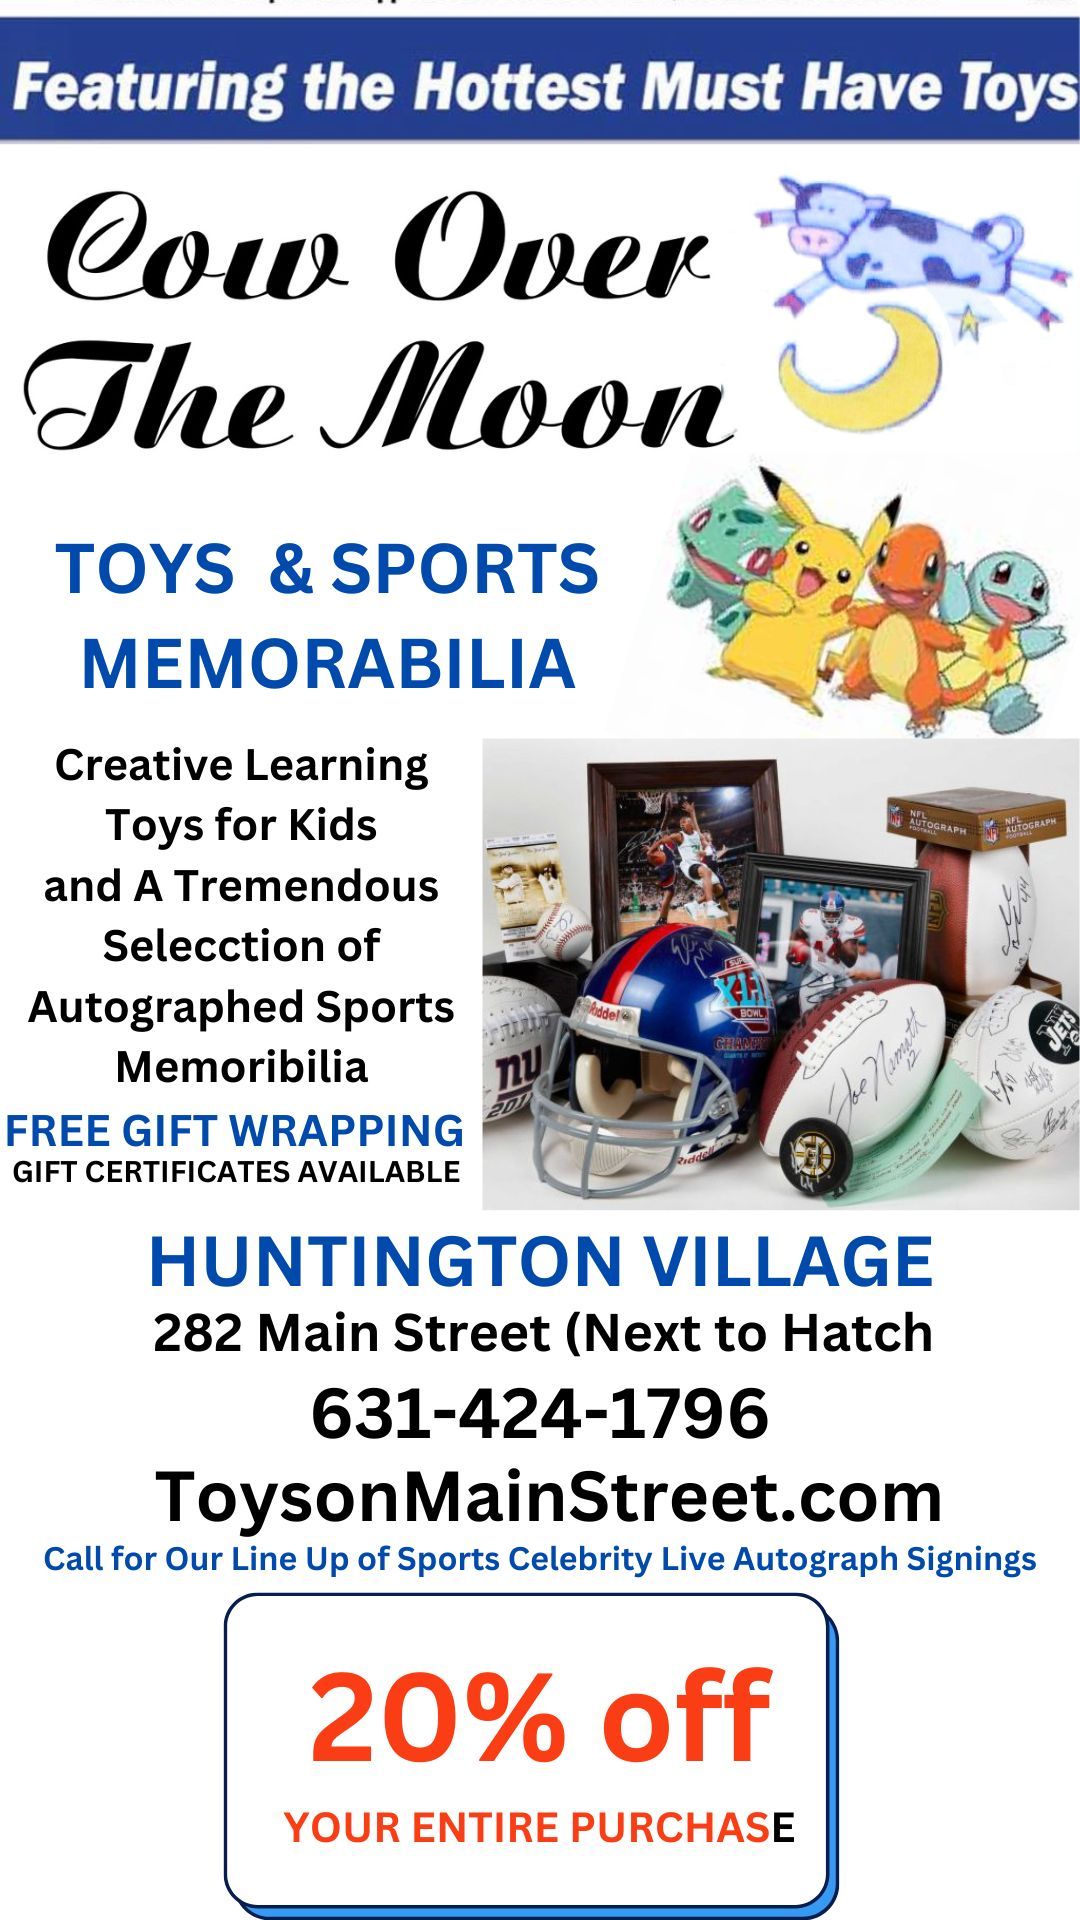 An advertisement for cow over the moon toys and sports memorabilia